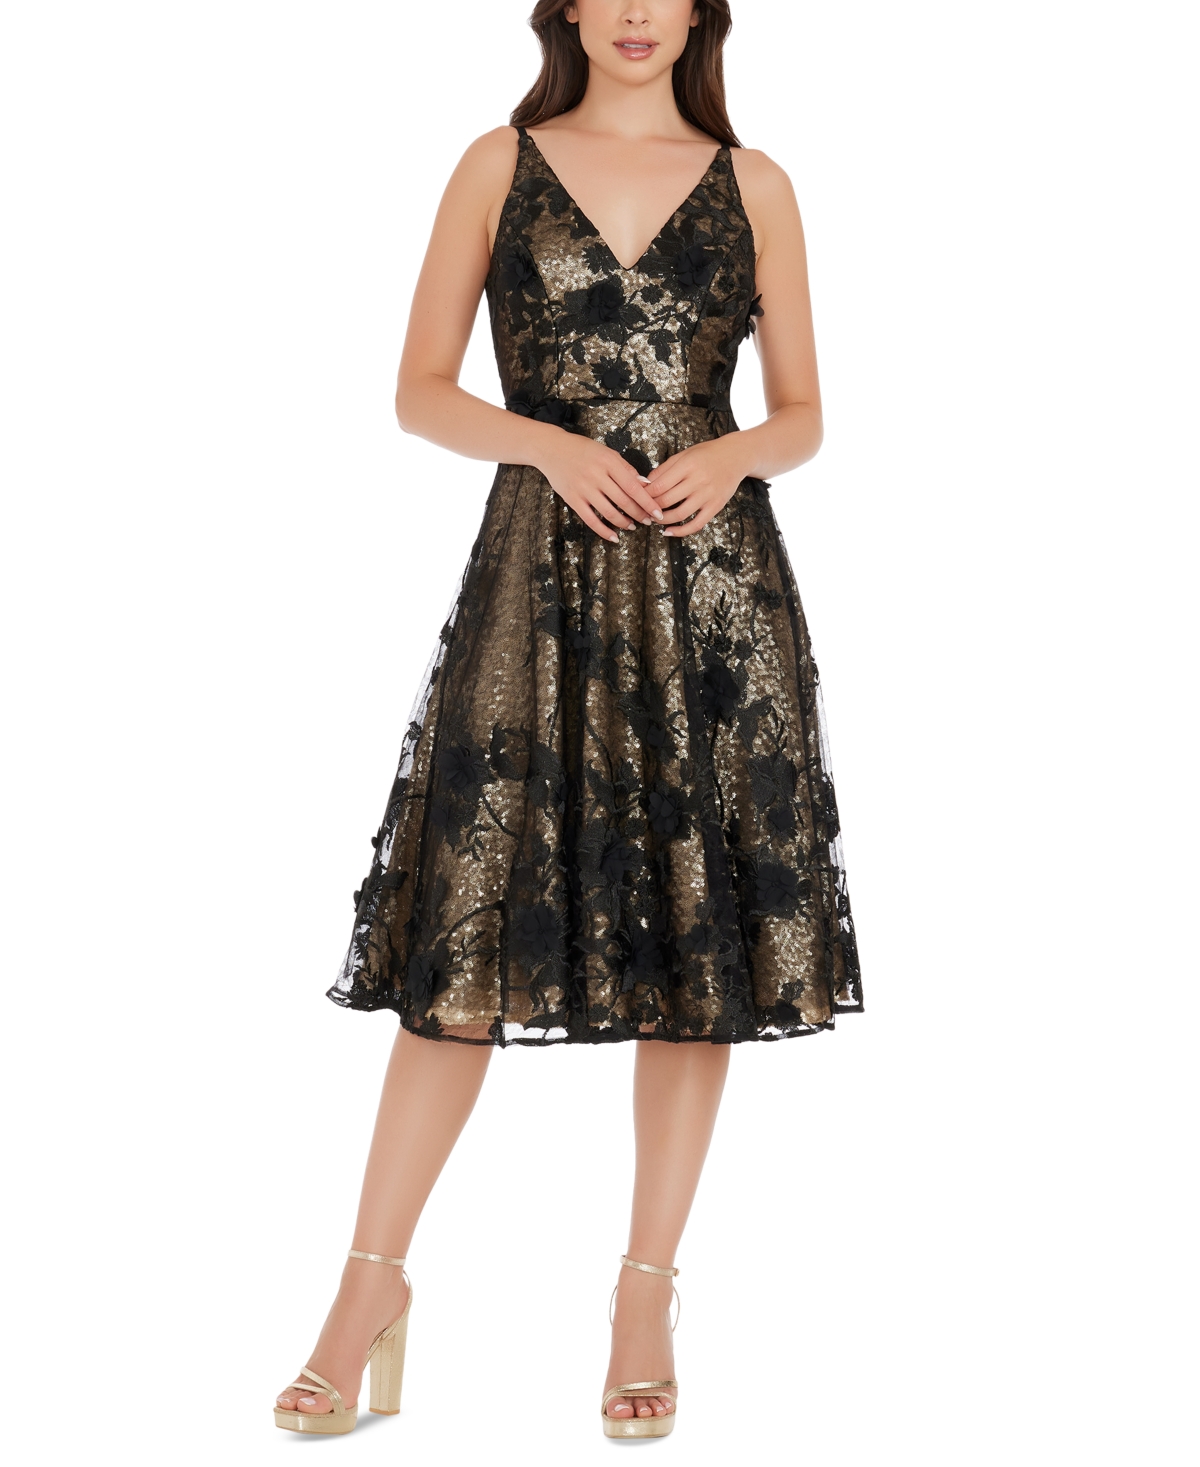 Elisa Women's Sequin and Lace Dress - Brushed Gold Multi